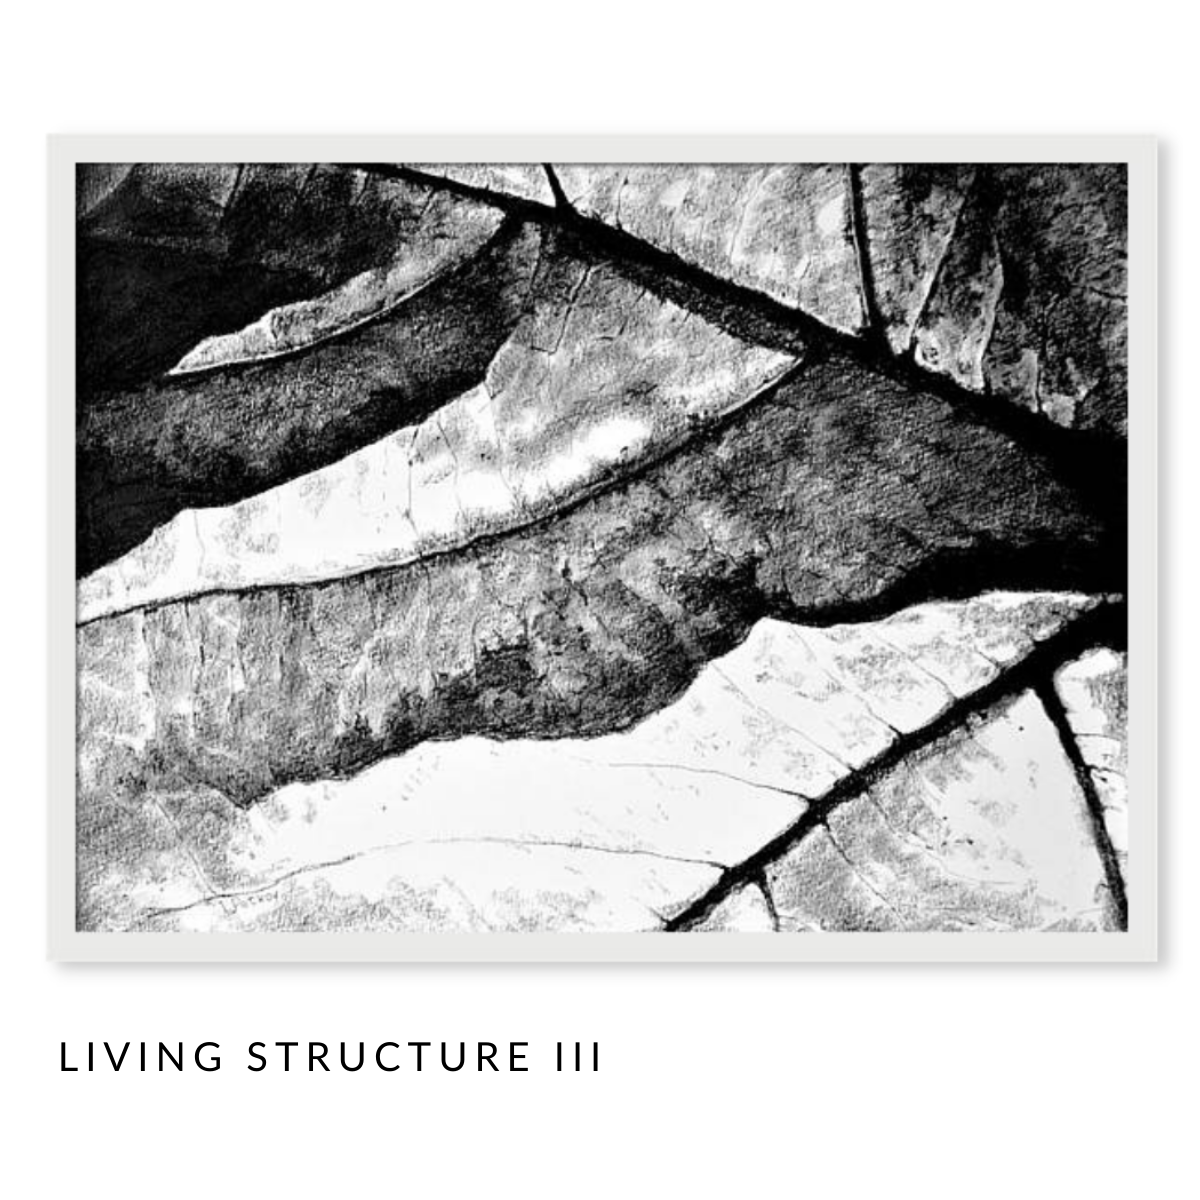 Living Structure Art Series - Set of 3 Black and White Pastel Drawings